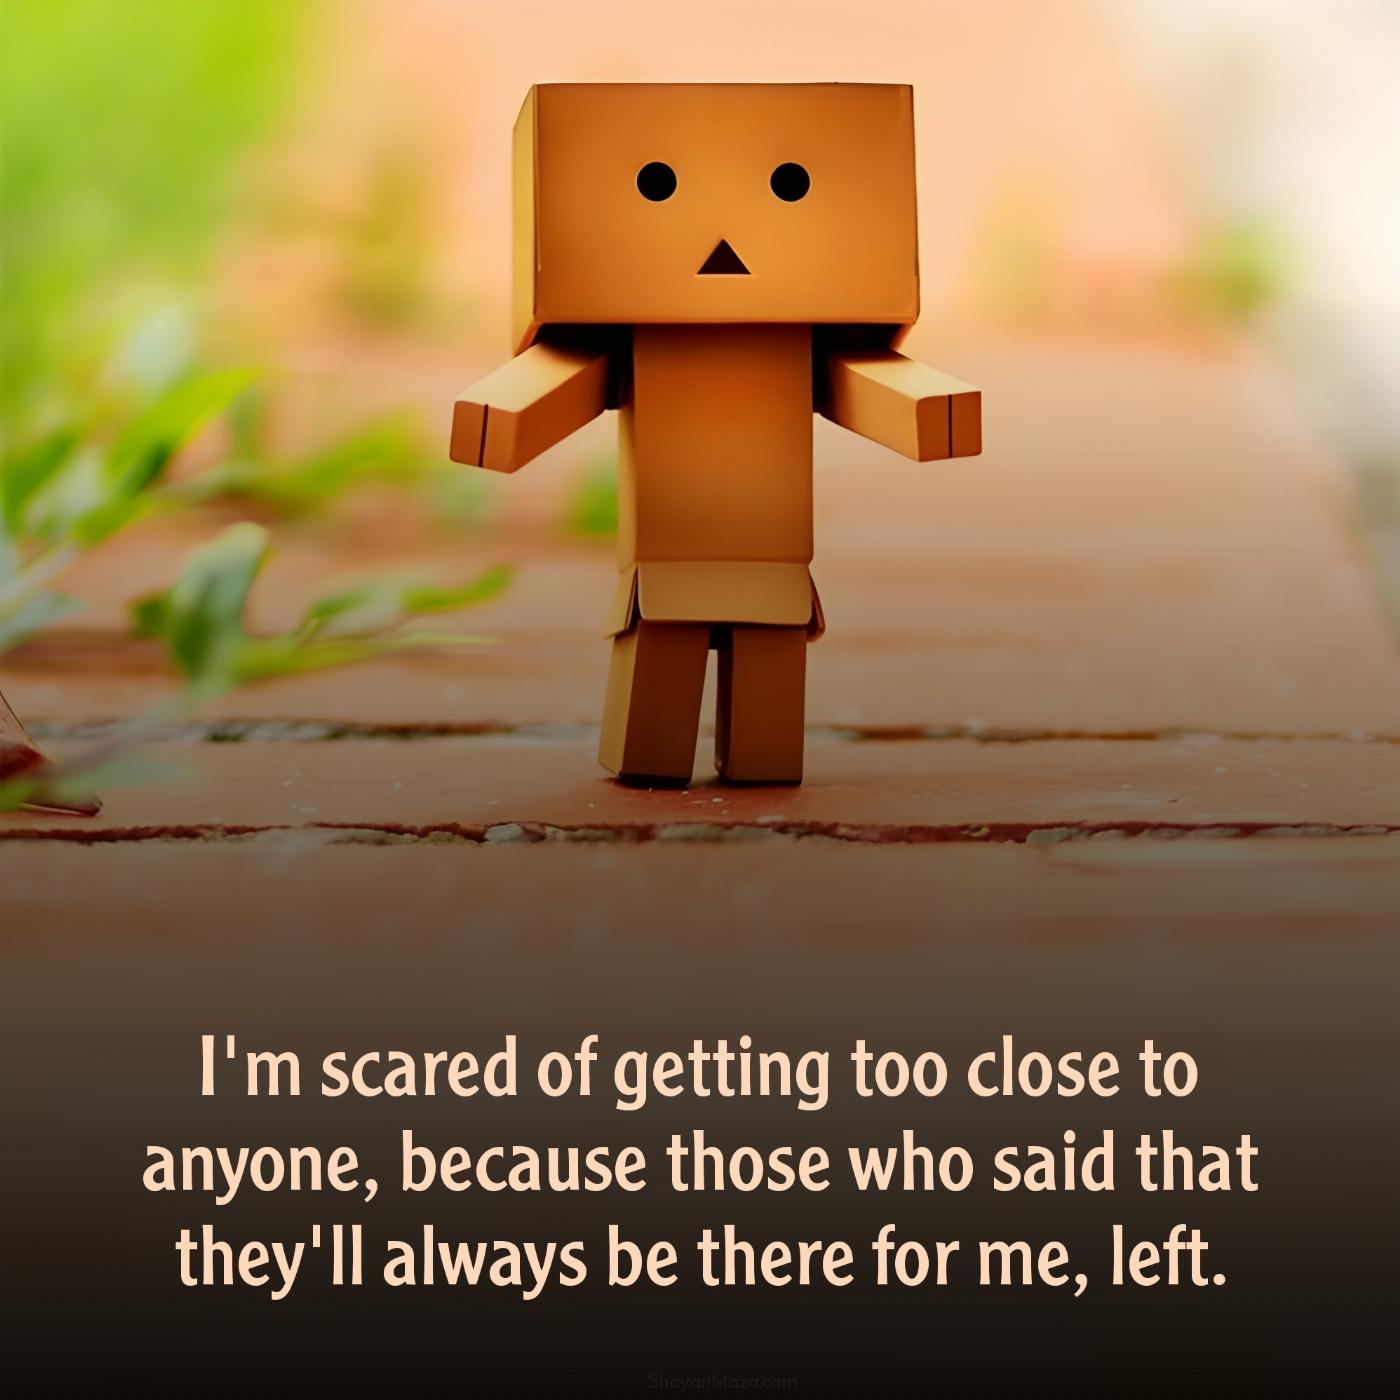 I'm scared of getting too close to anyone